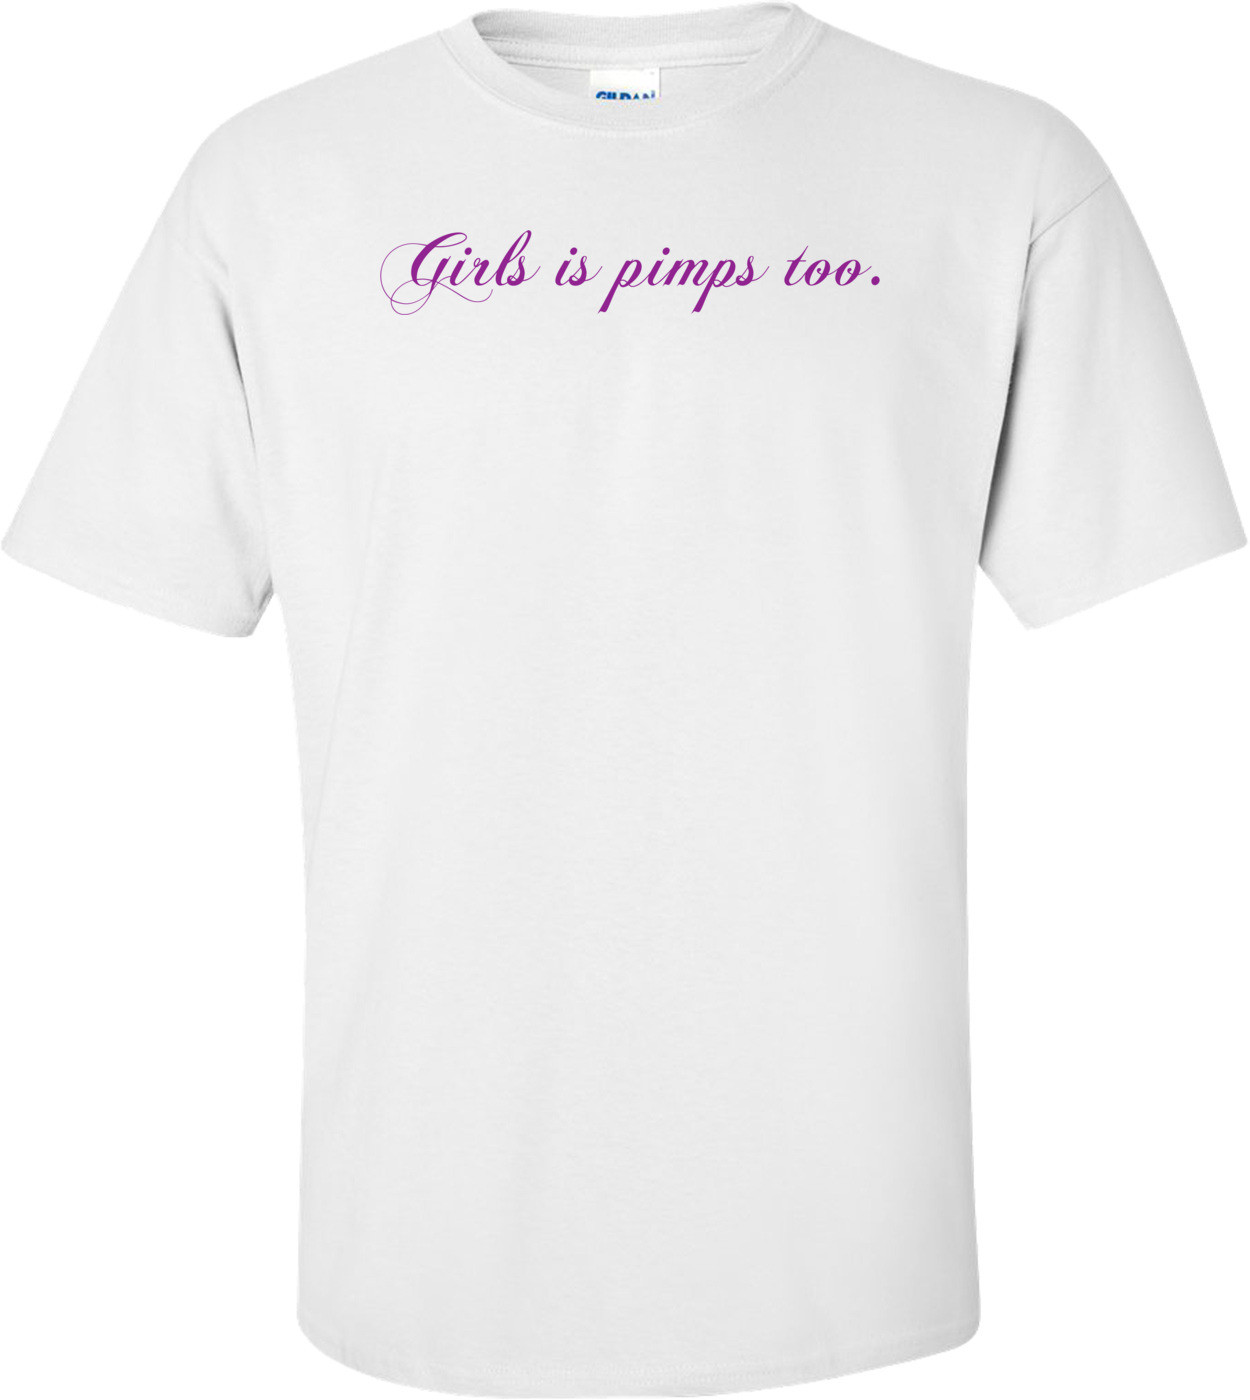 Girls Is Pimps Too. Shirt